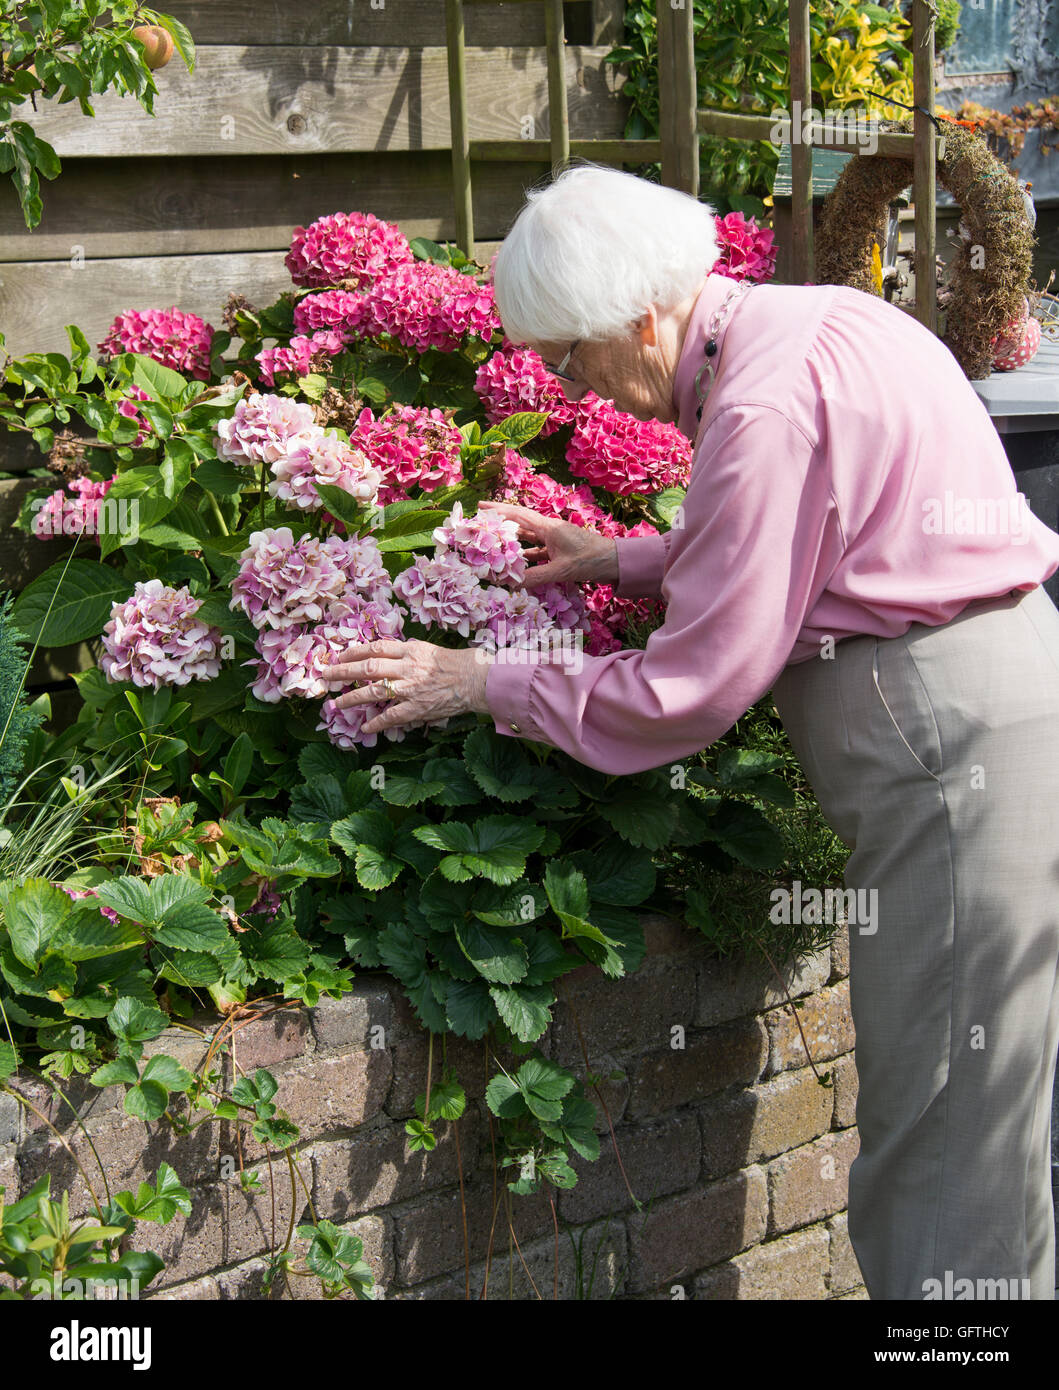 Old Woman 91 Years Old Working In Her Garden With The Hortensia Flowers And Green Plants Stock